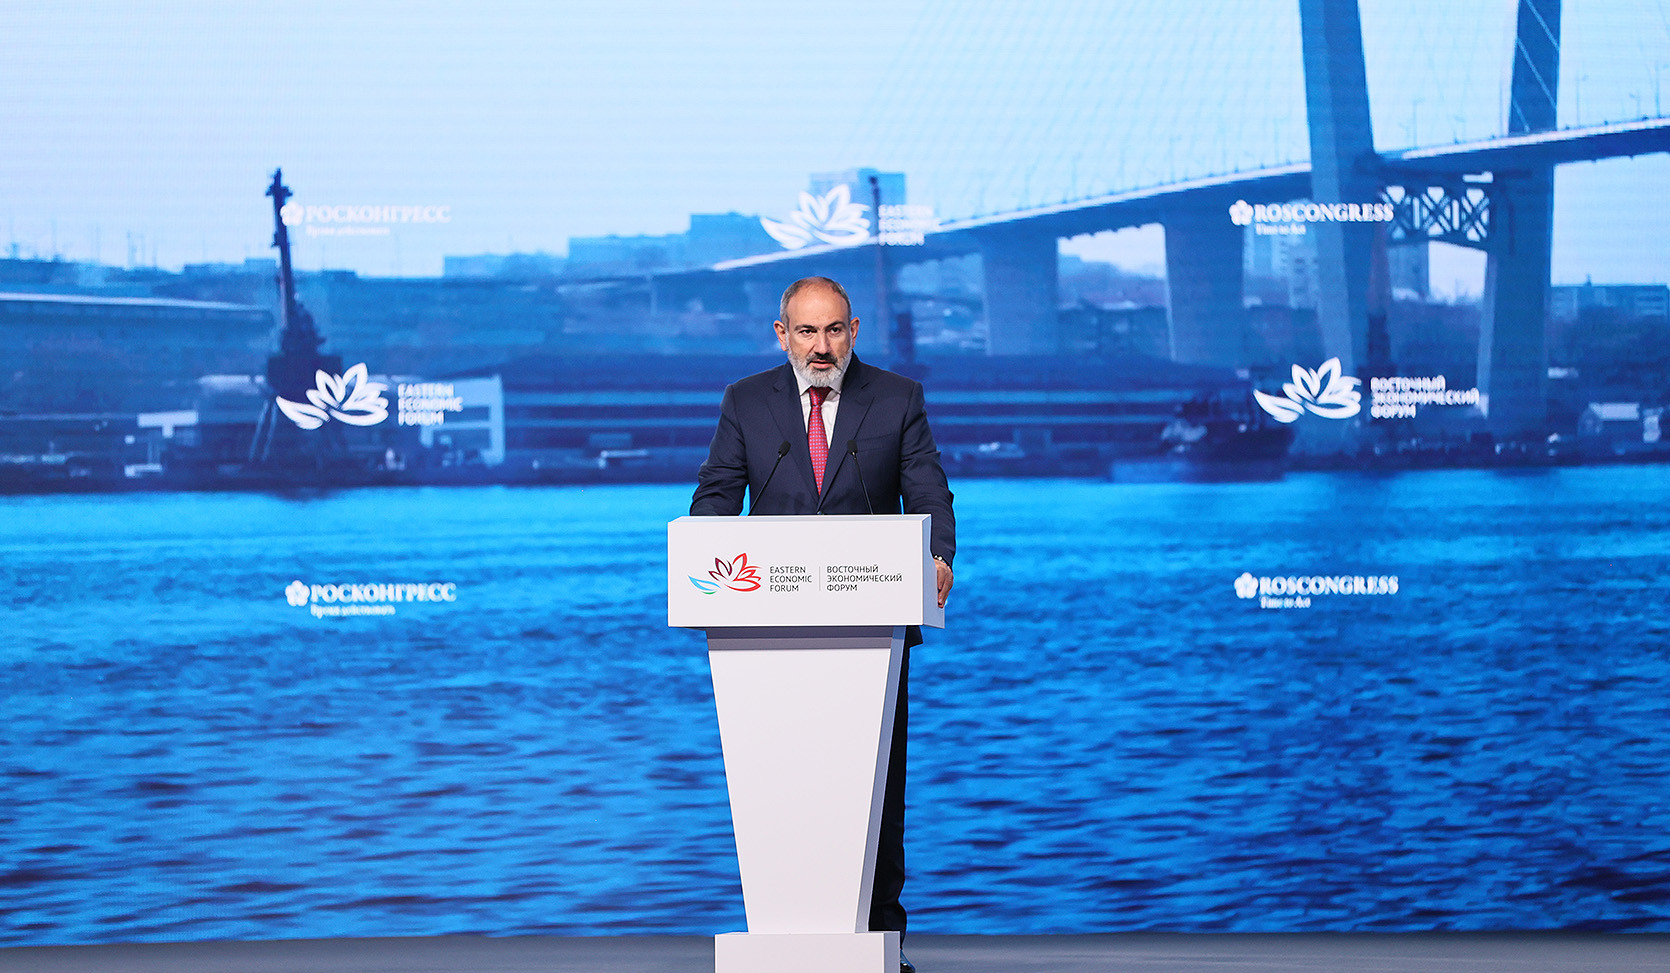 Times are not easy for our region either: Prime Minister's speech at plenary session of 7th Eastern Economic Forum